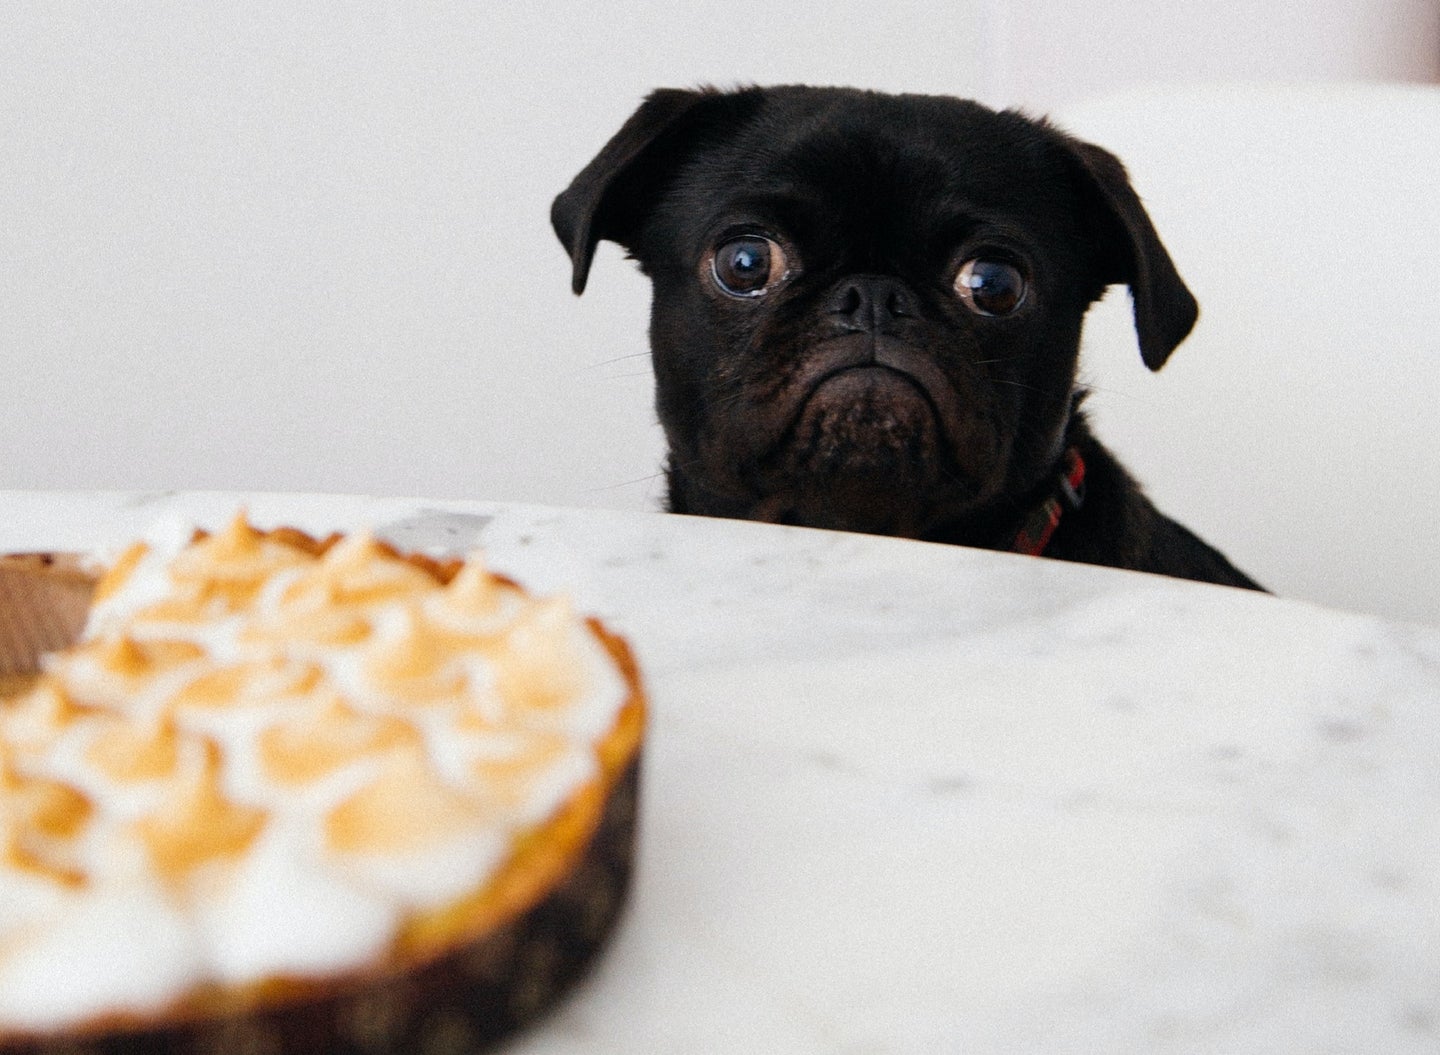 Black pug trying to eat dangerous foods for dogs and cats like pie